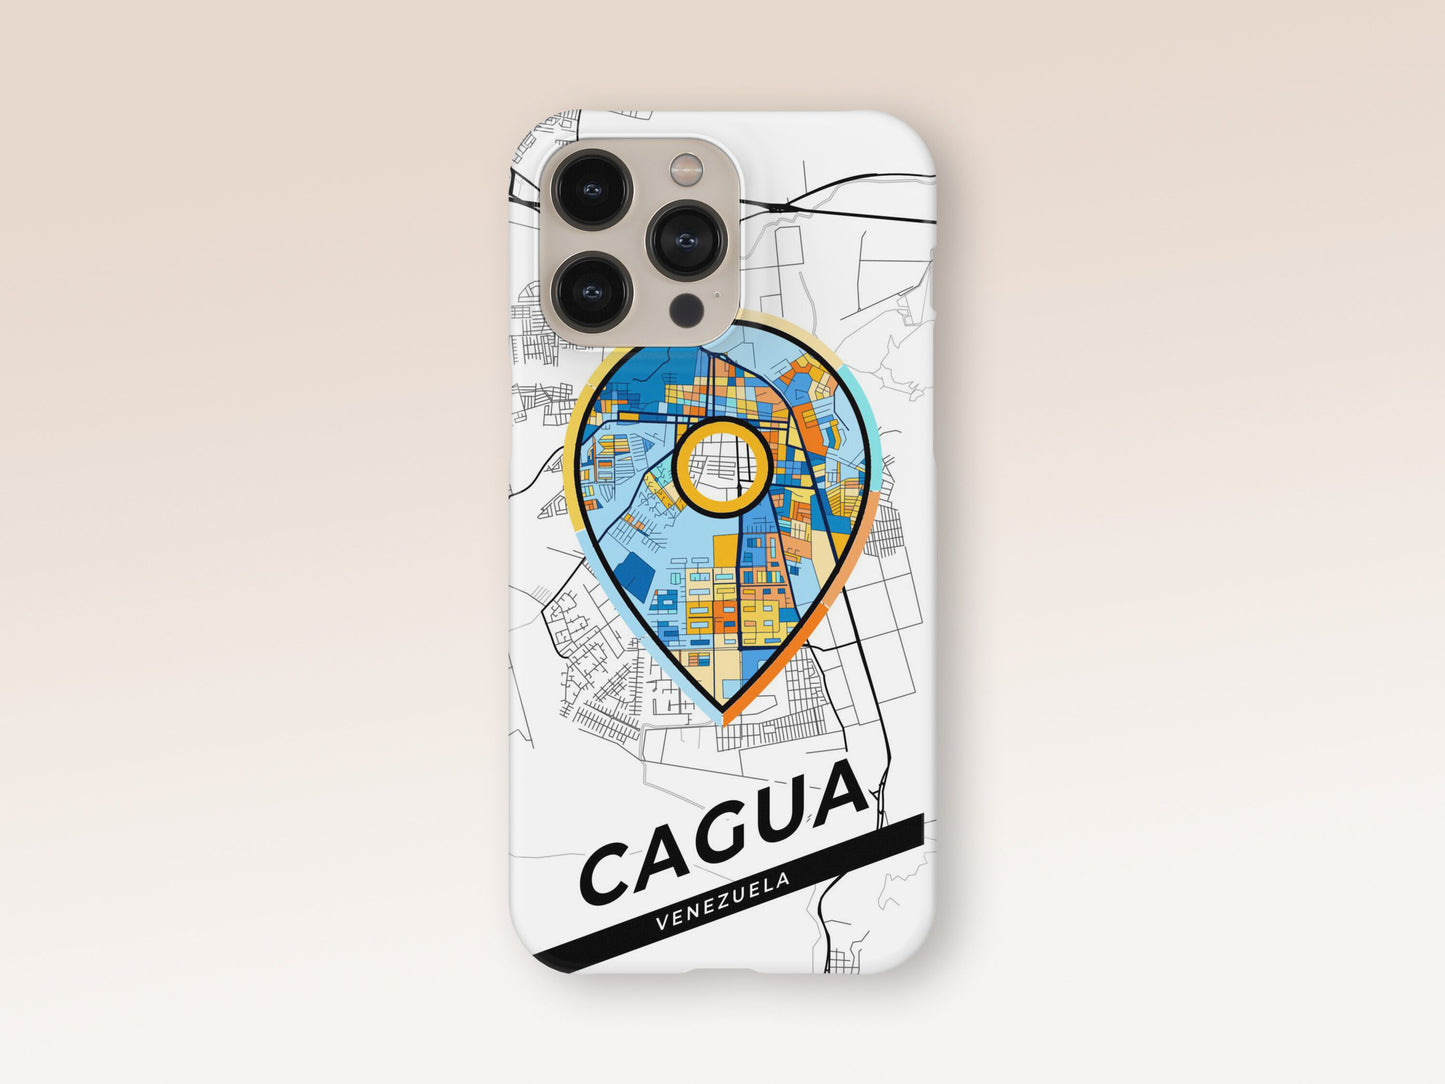 Cagua Venezuela slim phone case with colorful icon. Birthday, wedding or housewarming gift. Couple match cases. 1